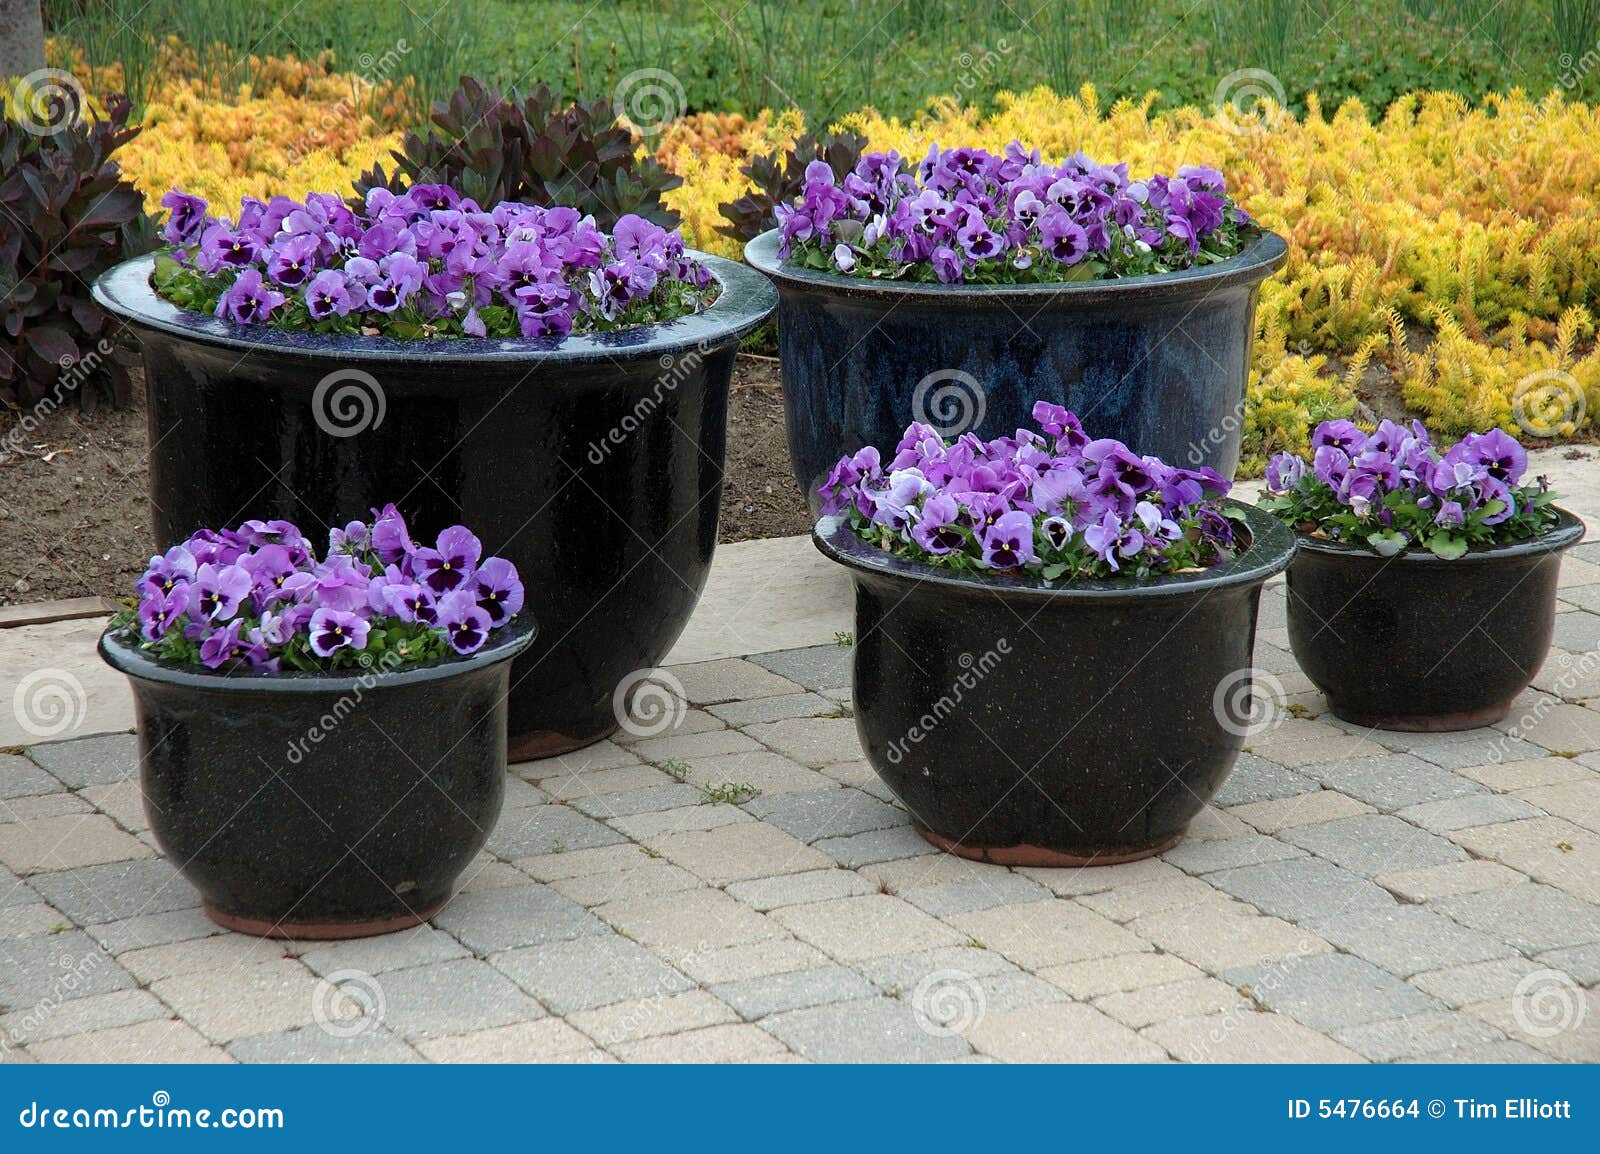 Various sized containers of purple pansies.